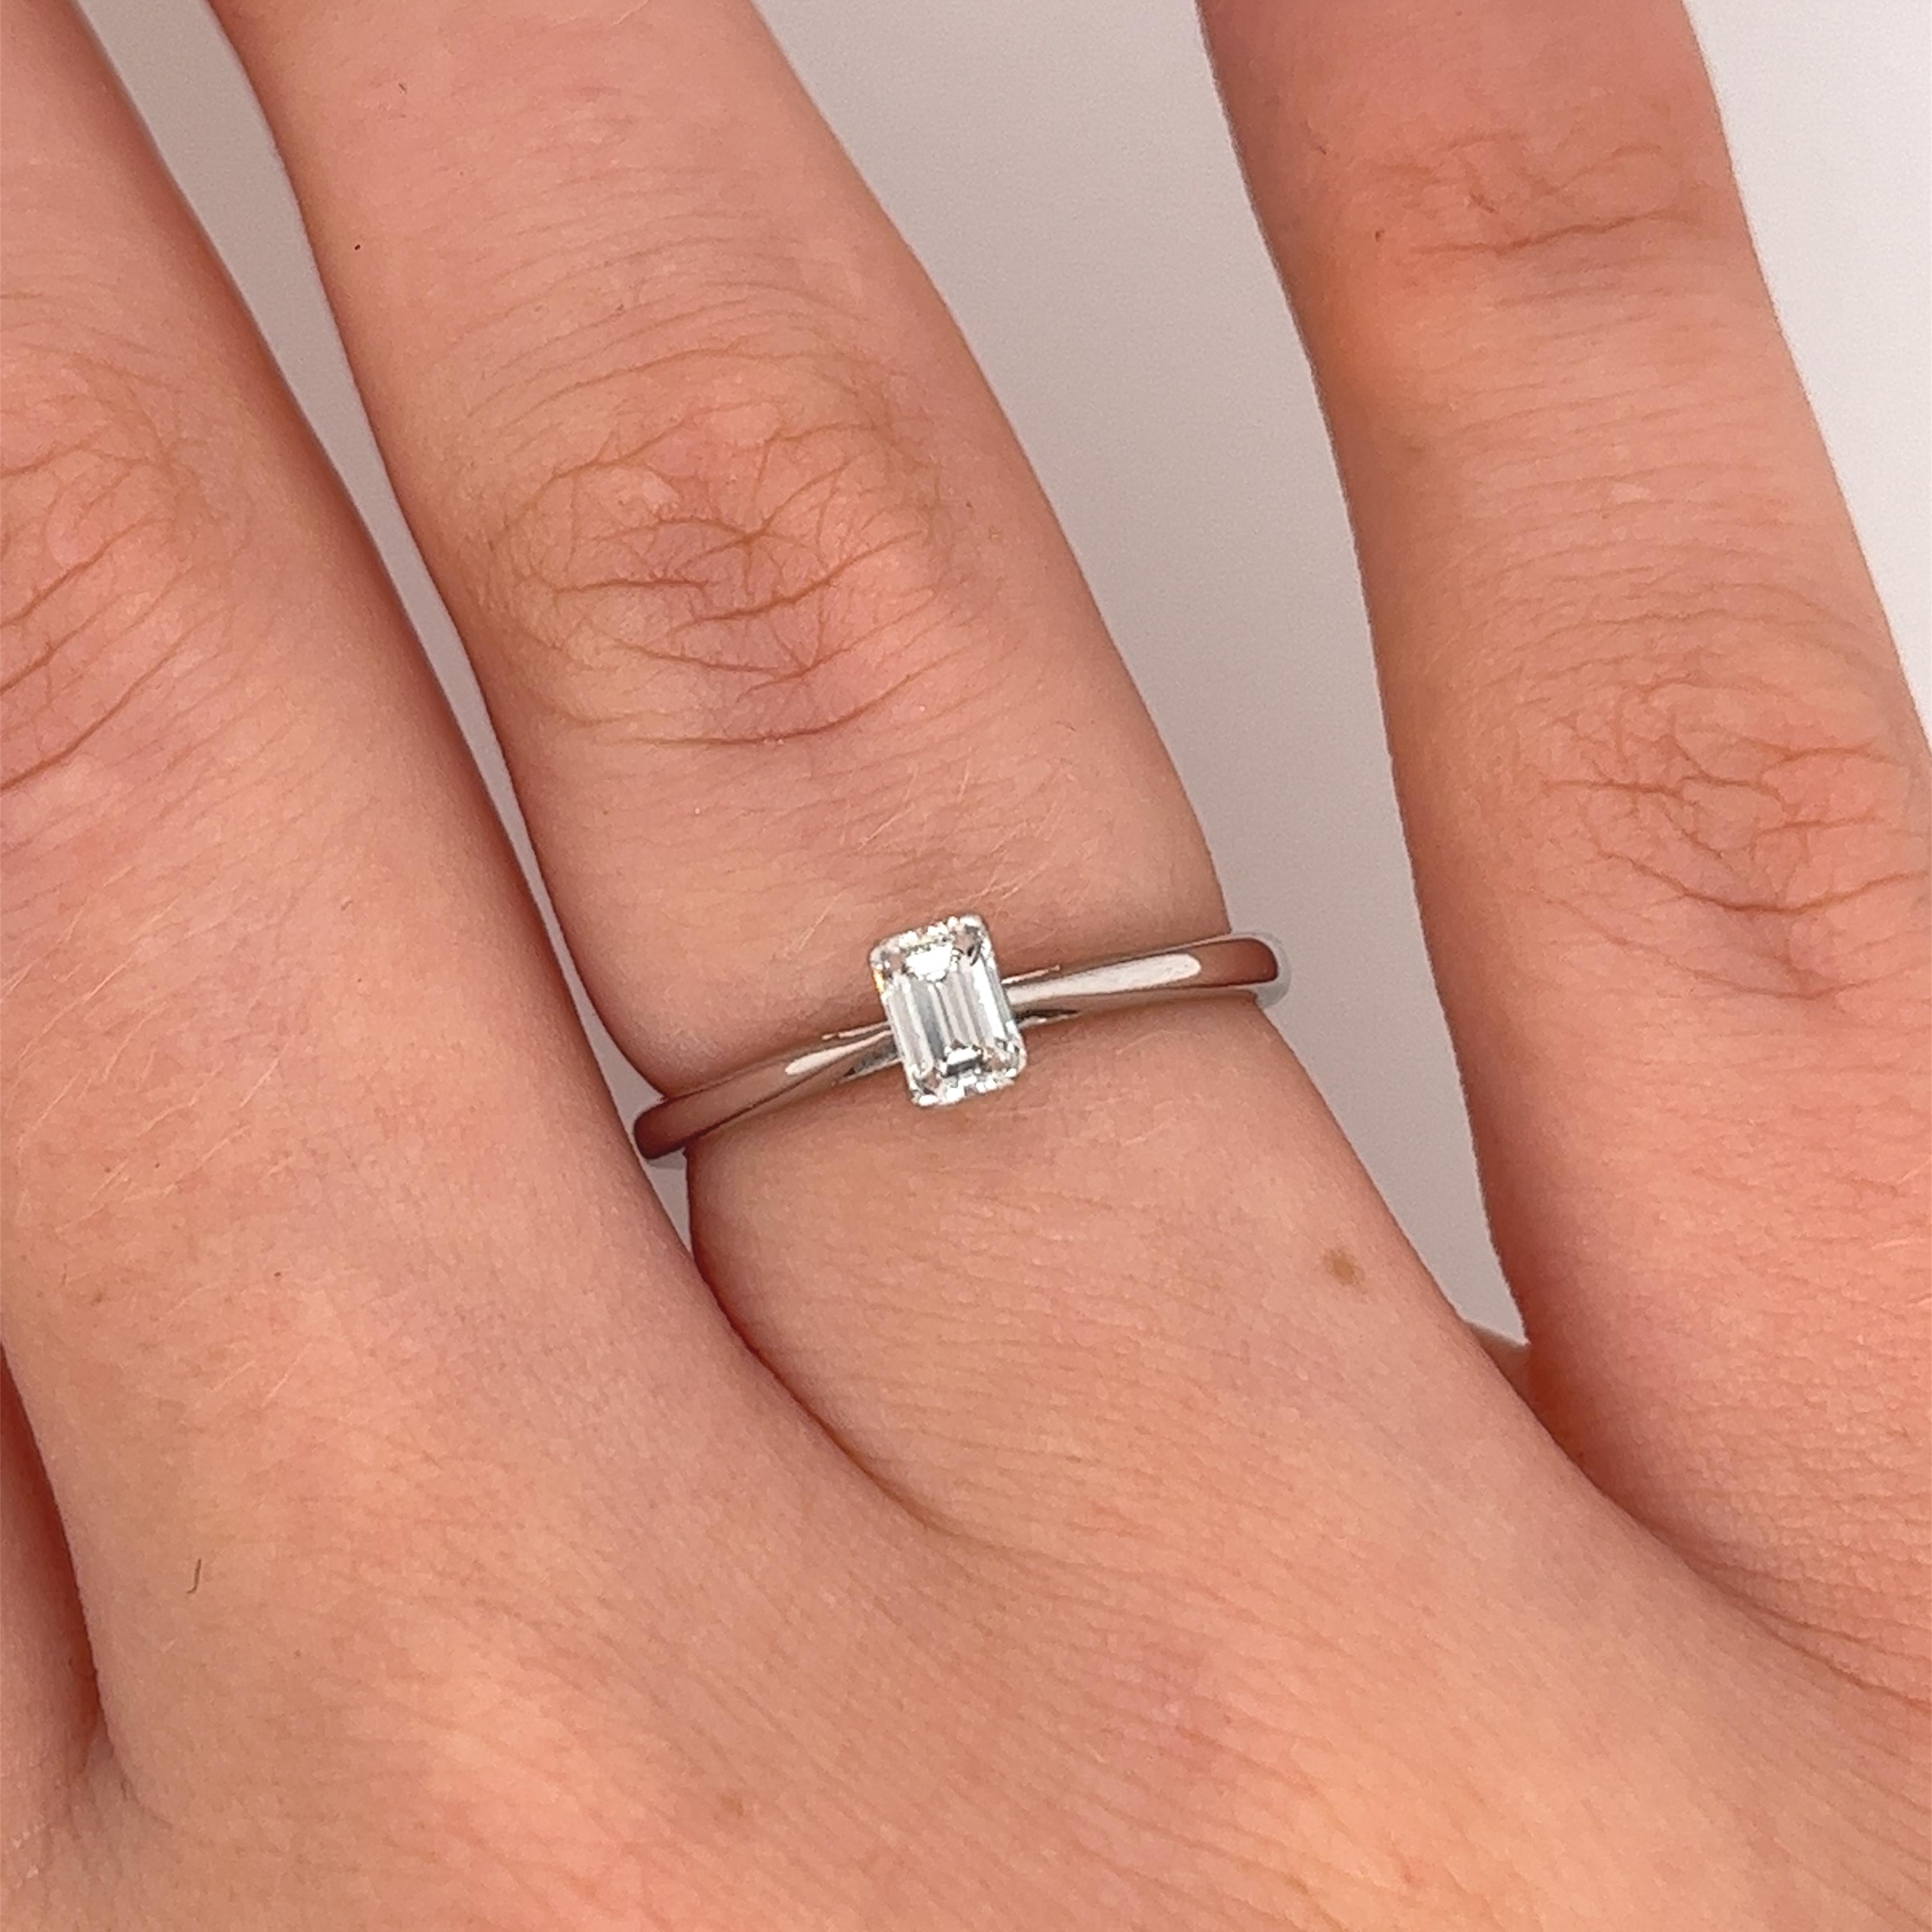 18ct White Gold Diamond Solitaire Ring Set With 0.20ct F-VS1 Emerald cut Diamond For Sale 1